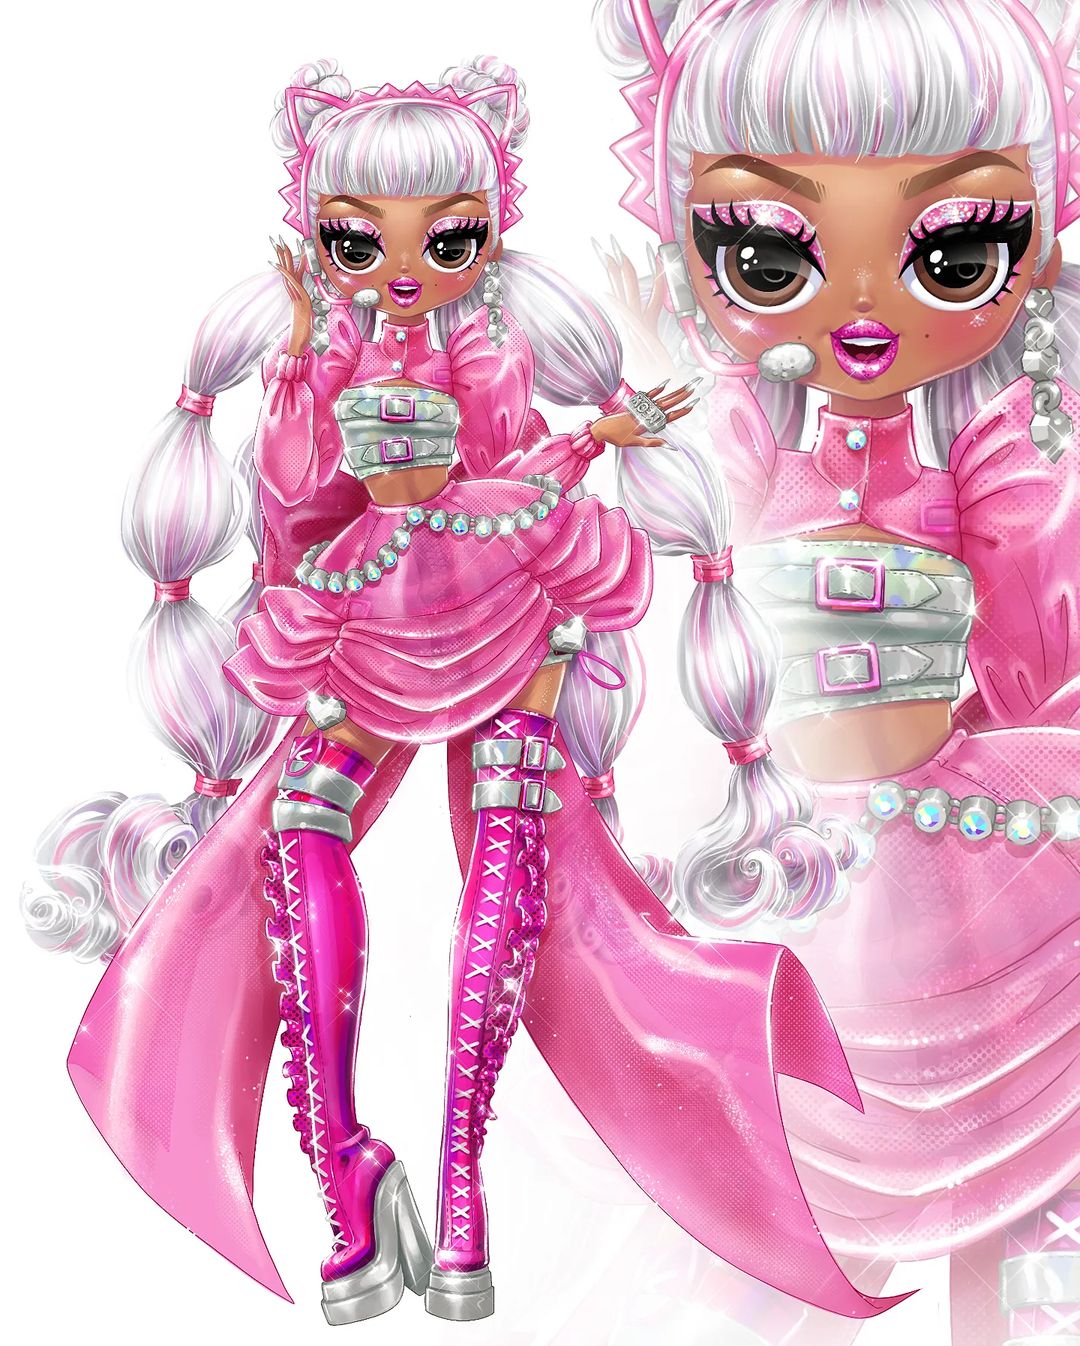 Lol omg fierce series dolls kitty k and candylicious